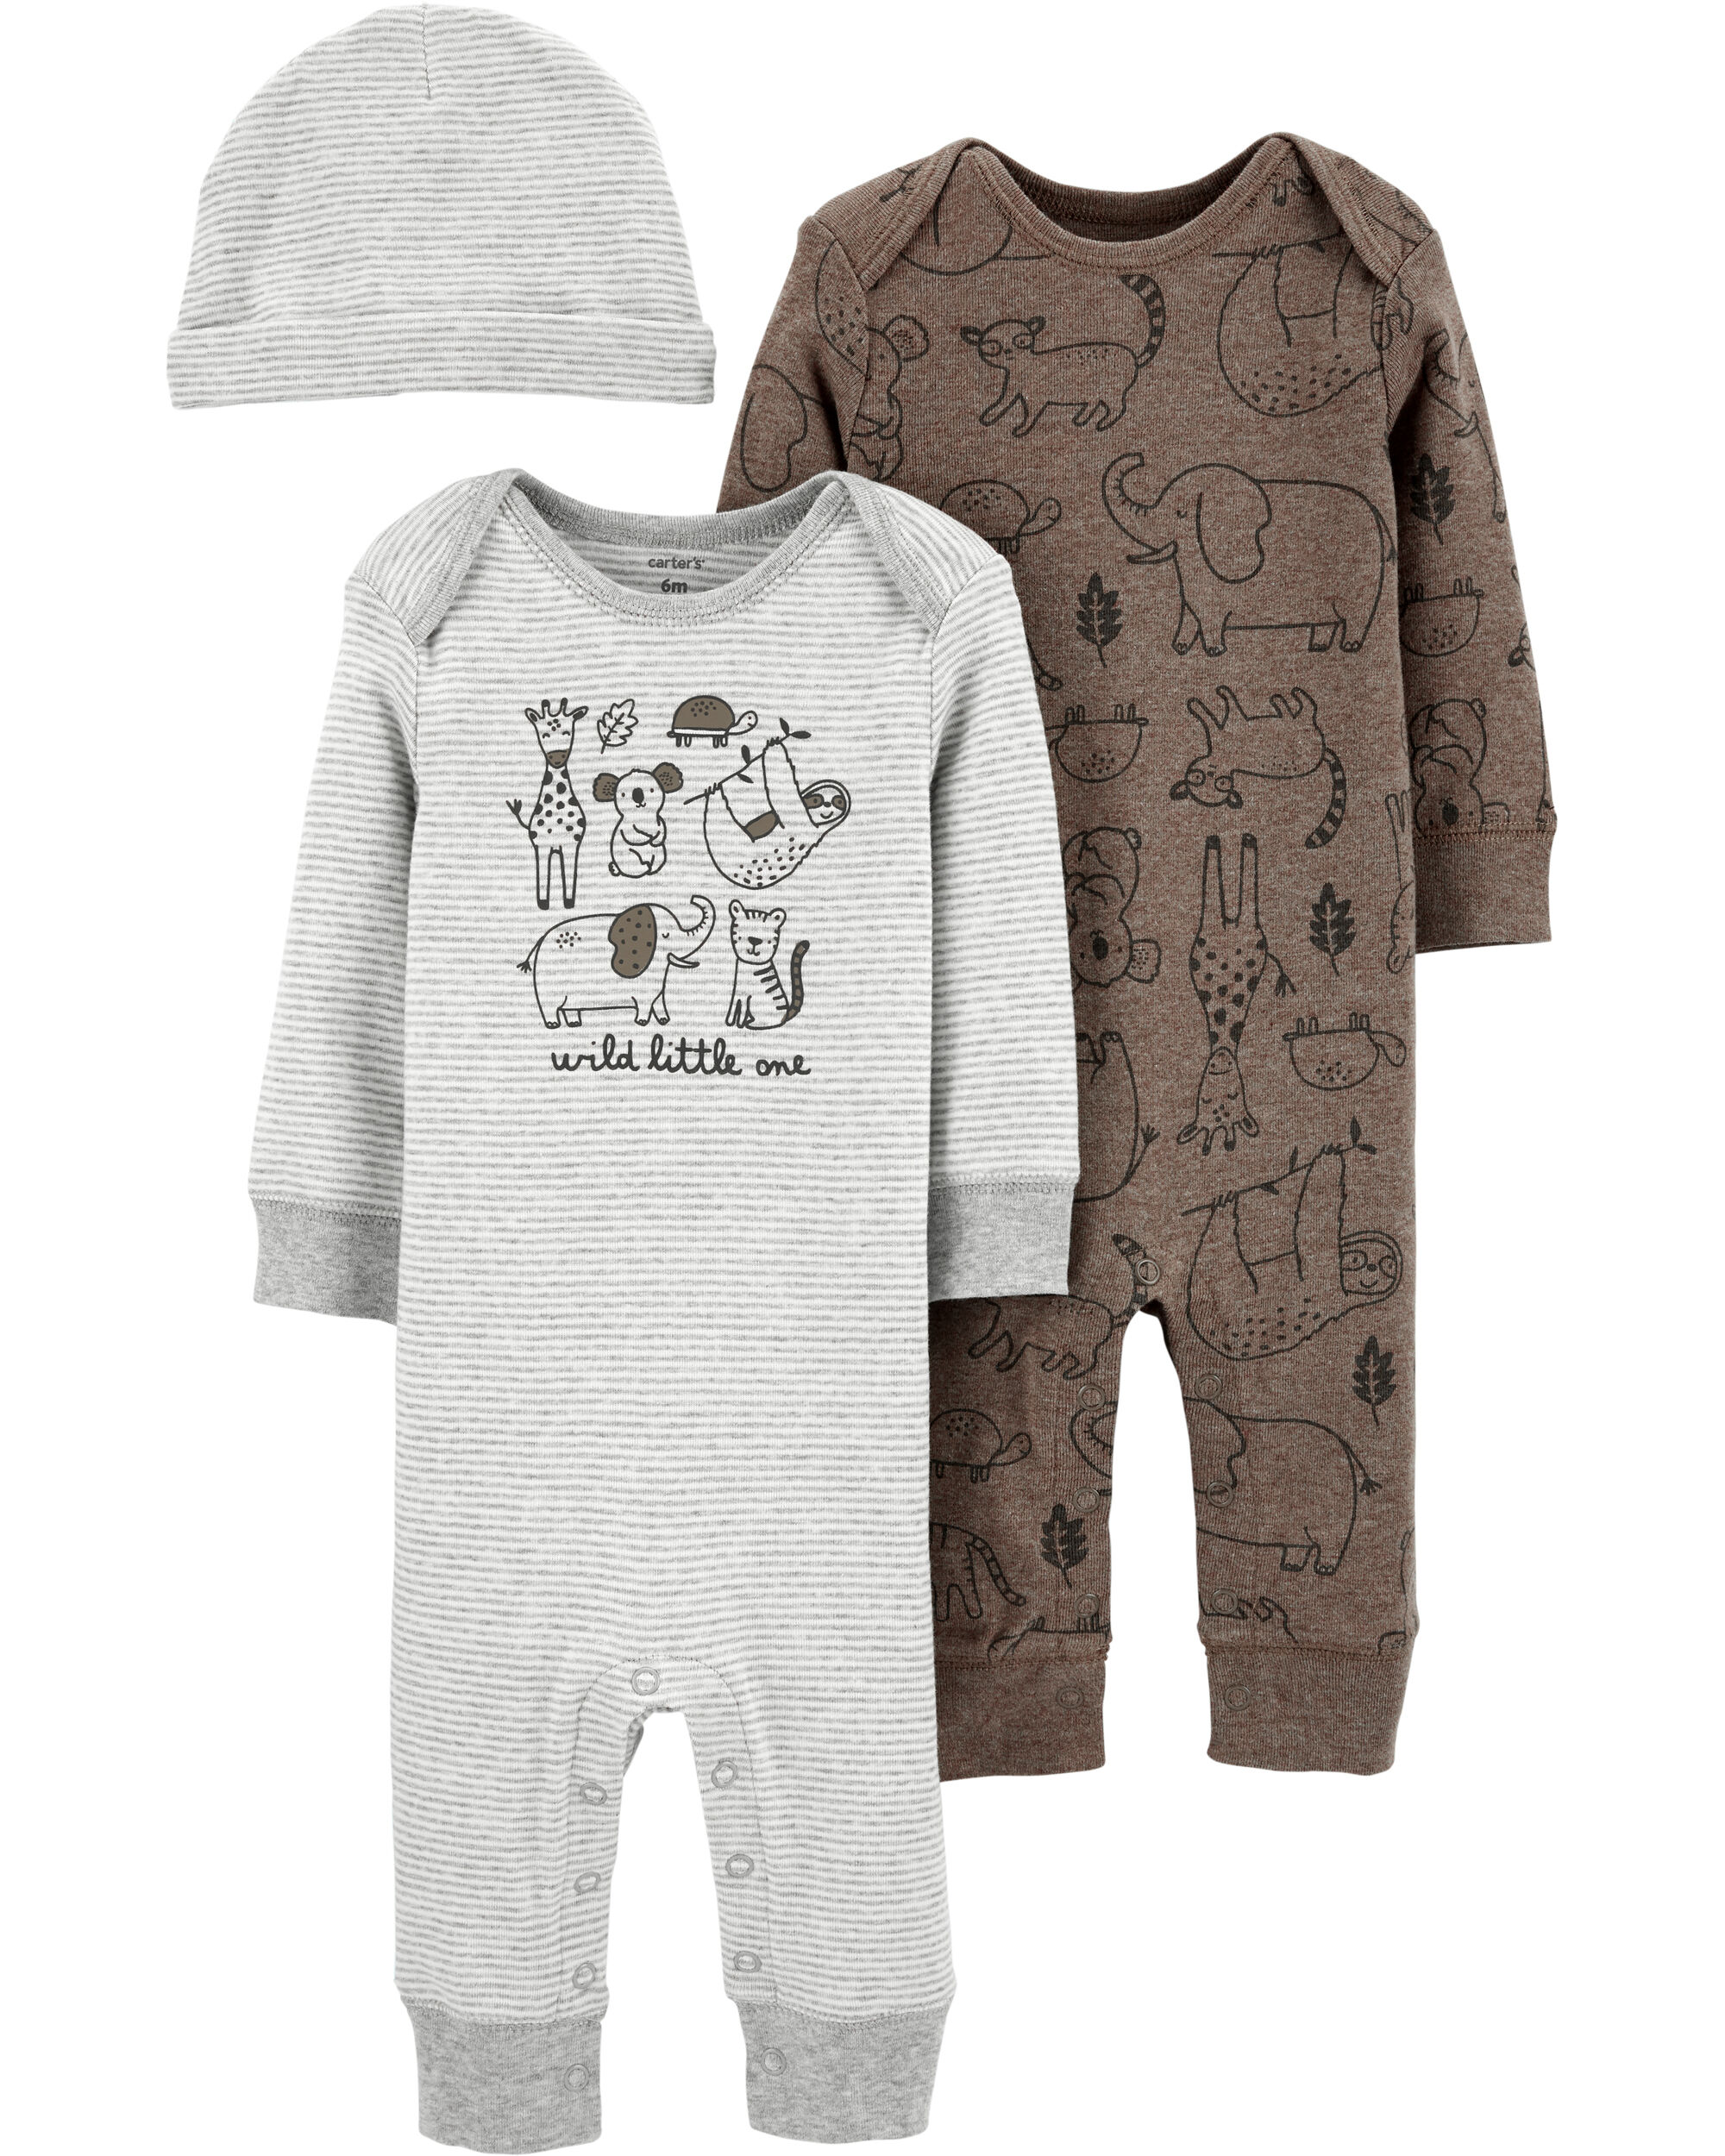 carters baby boy christmas outfits